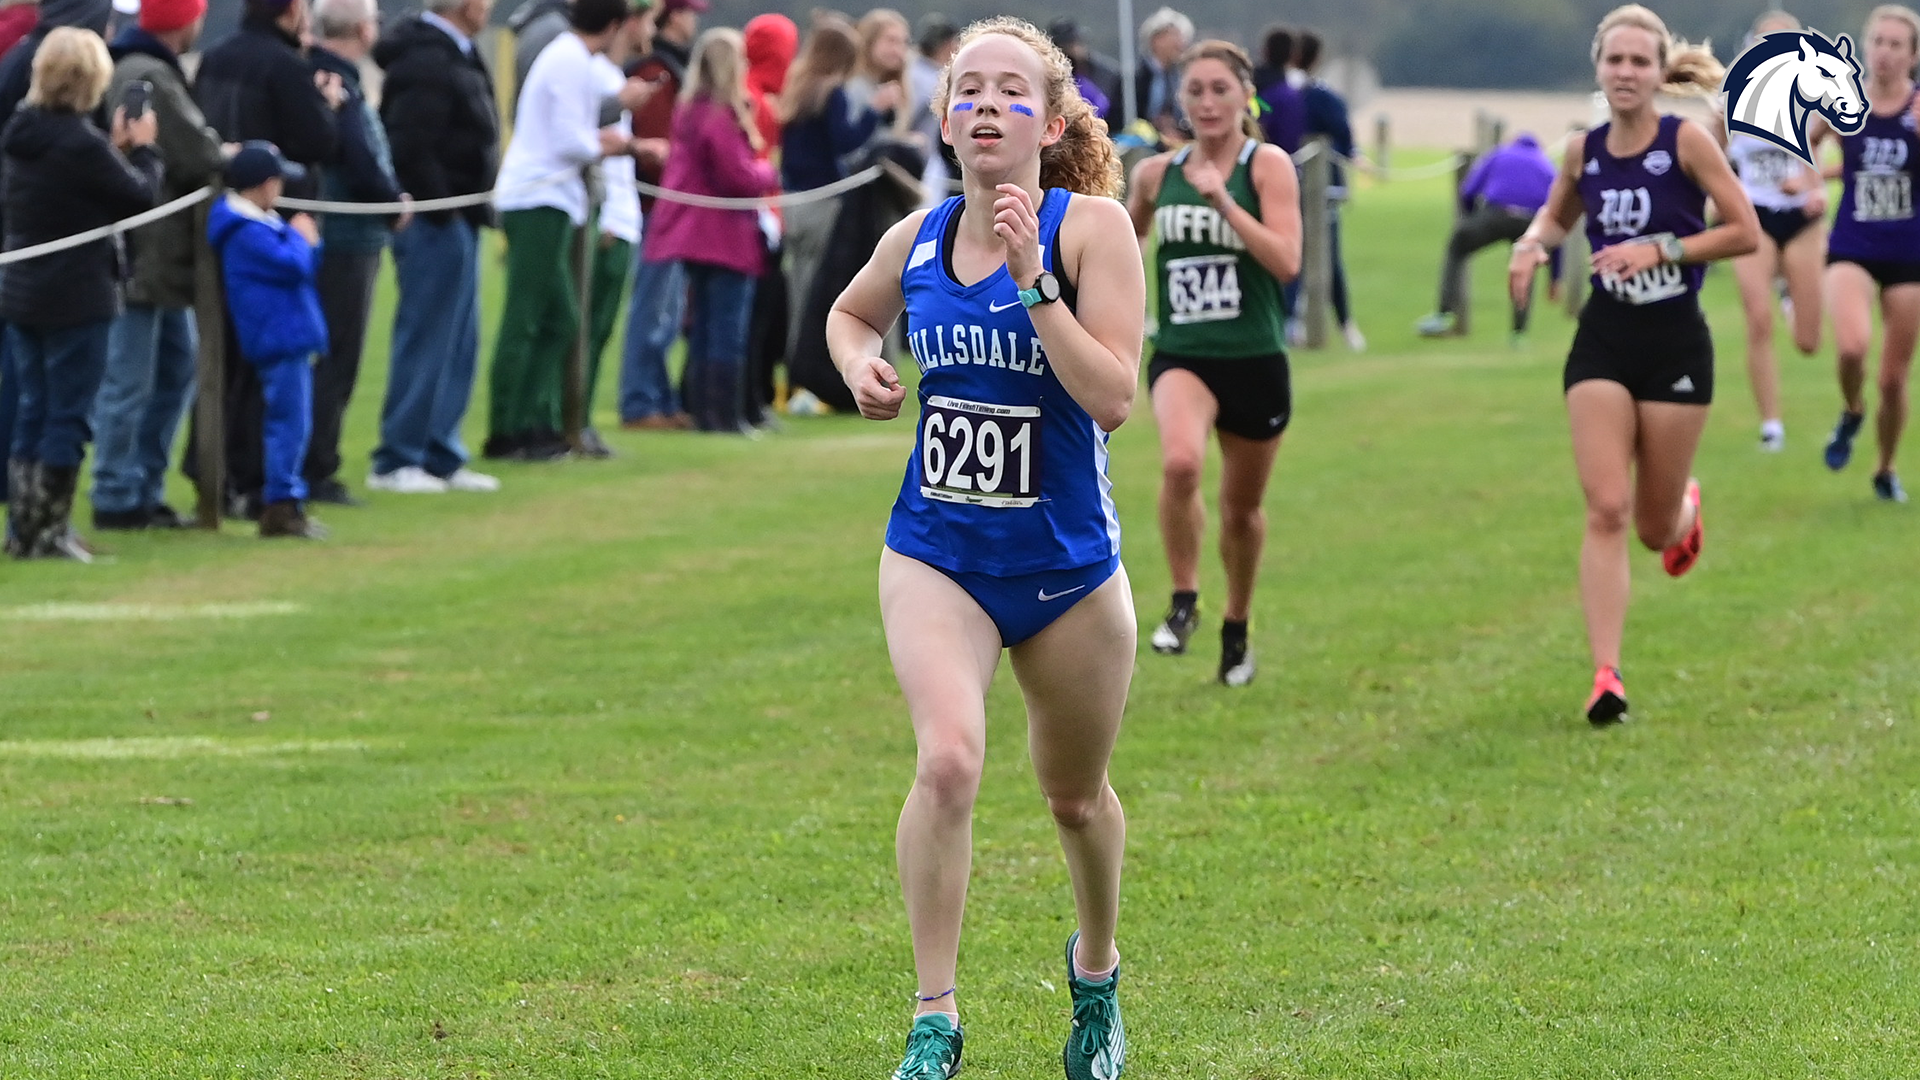 Charger women place three in top 30; take sixth at Lucian Rosa Invite